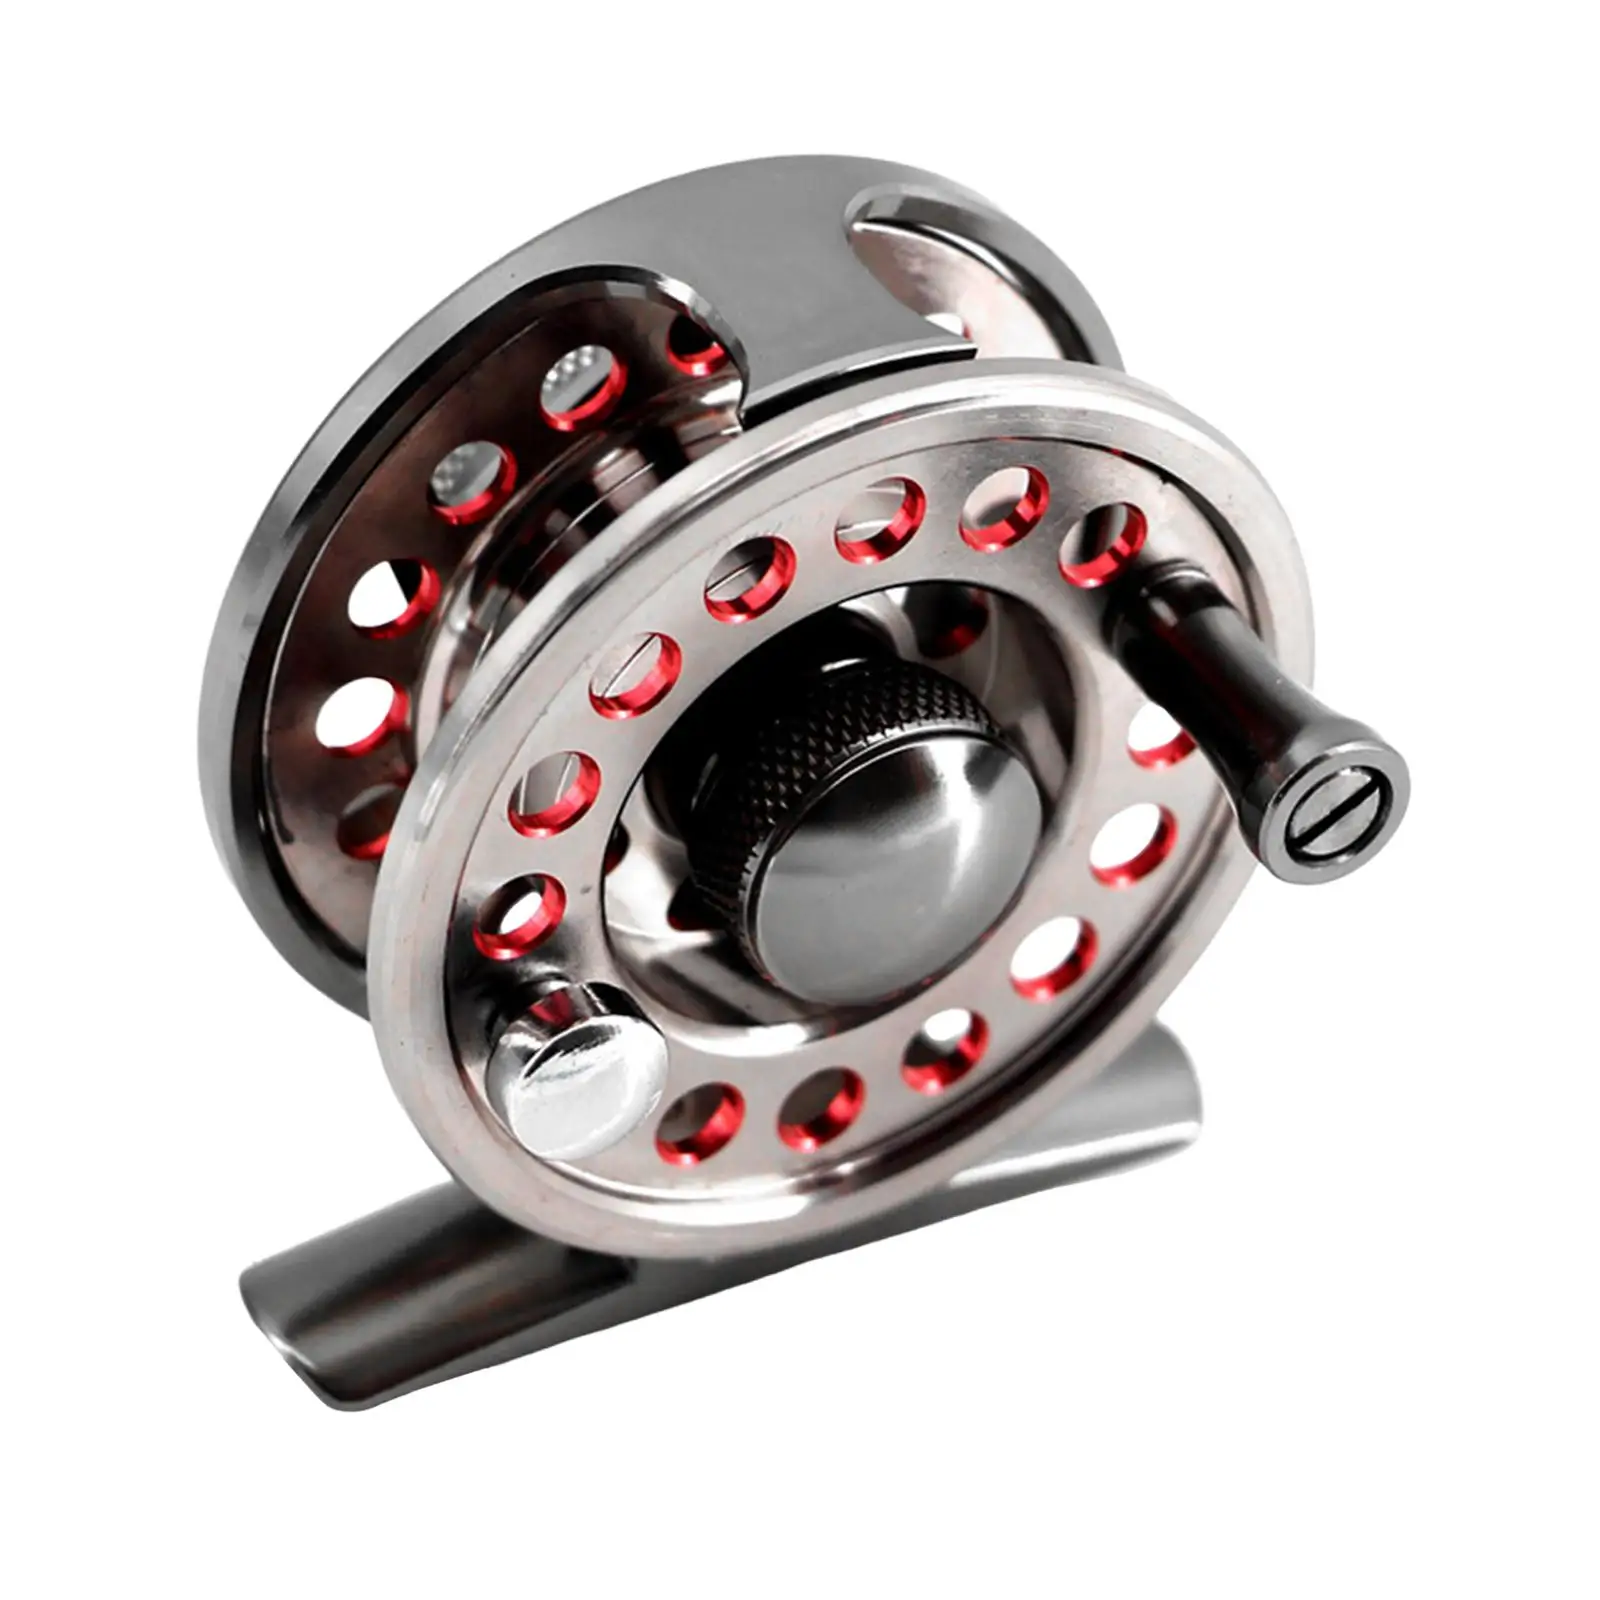 Ice Decomposition Fishing Reels Spool Center Braking System L/R Hand for Freshwater Saltwater Tools Fish Tackle Gear